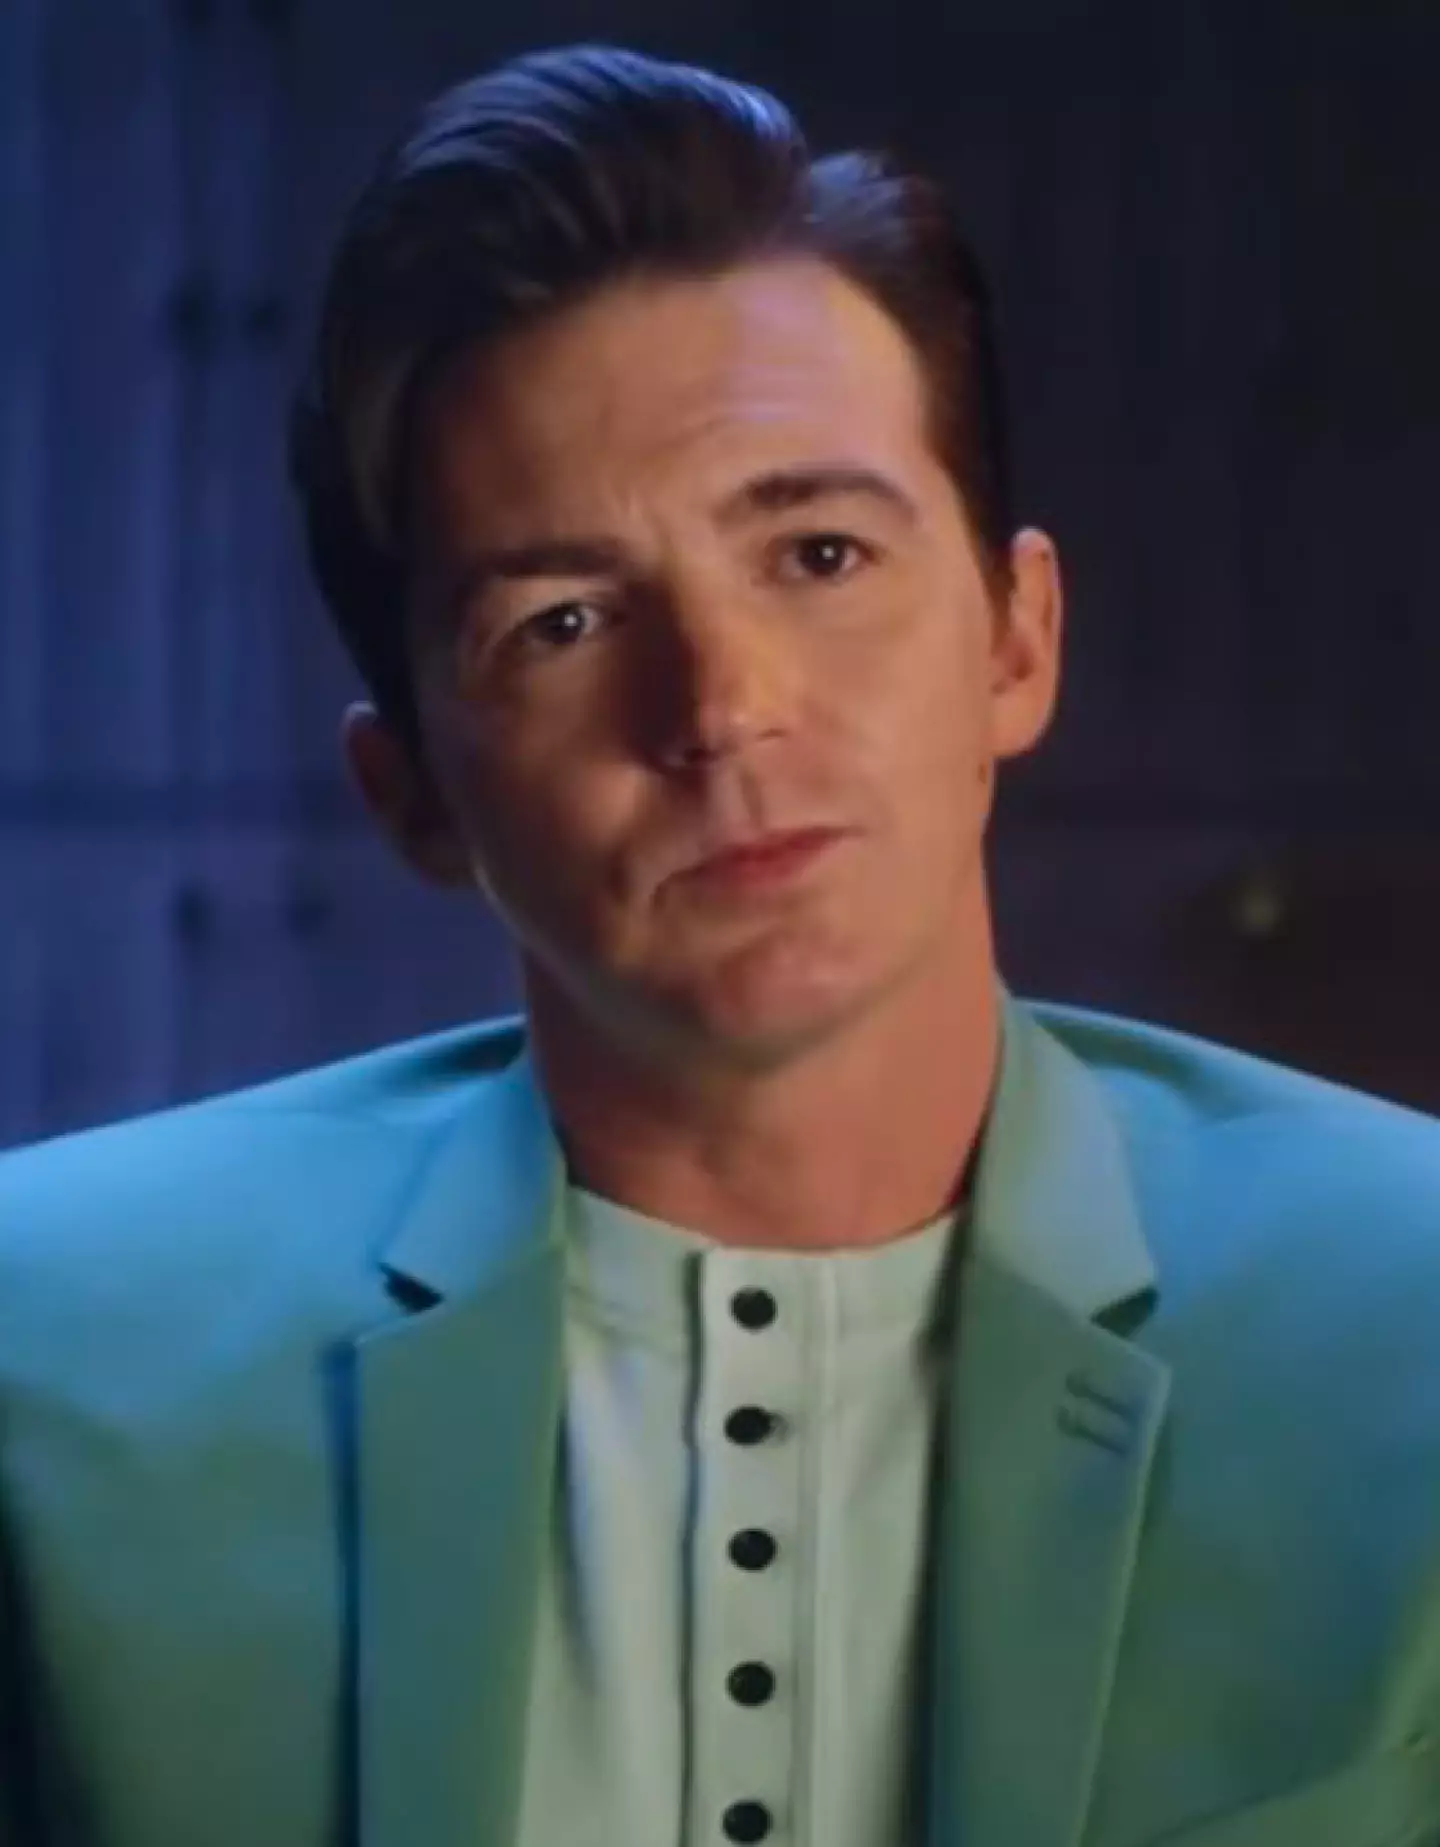 Drake Bell has opened up on the alleged abuse in a new doc.